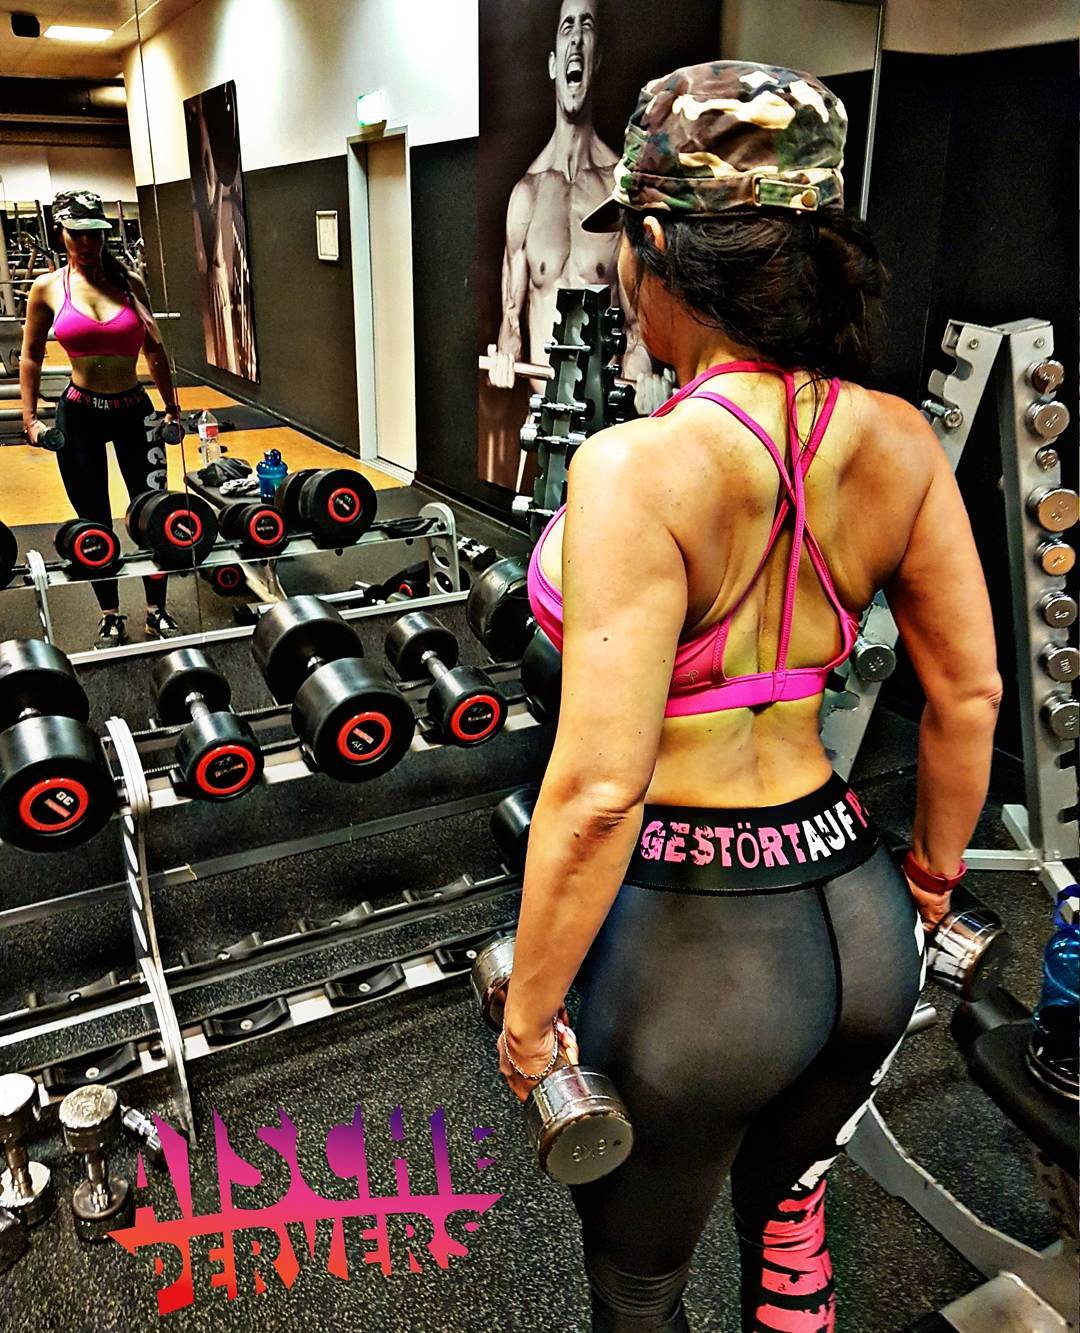 Sore today…….strong tomorrow💪💪
Hose @musclehammer 
#workout #Motivation #gym #back #backday #booty #gains #strong #nevergiveup #mcfit #johnreed #training #bodybuilding #fit #fitness #instafit #fitfam #gymfreak #pain #model #fitnessmodel